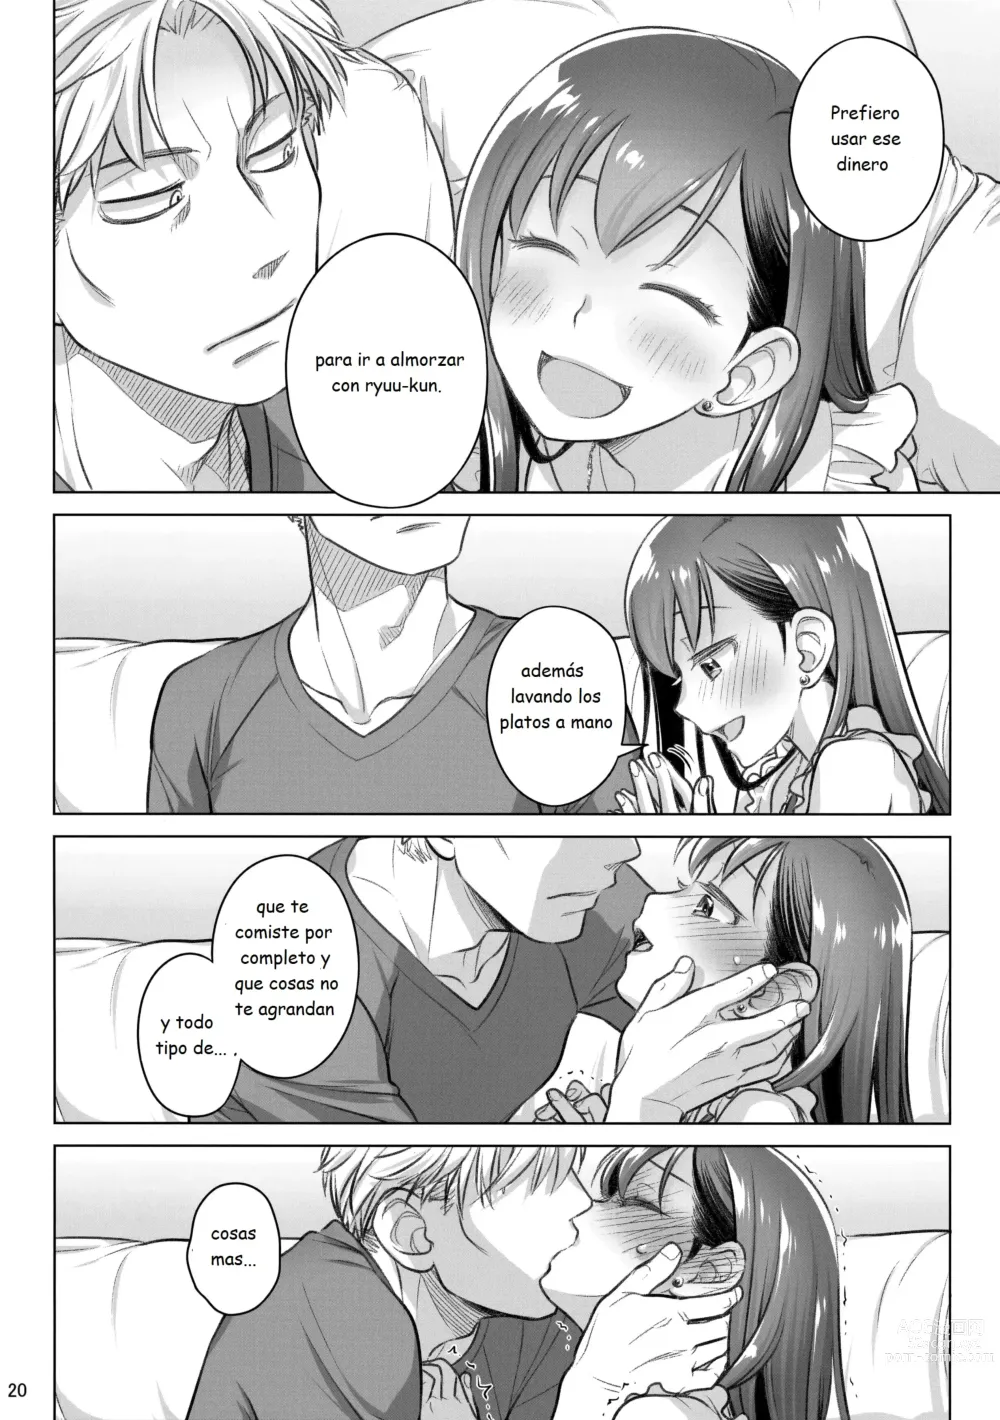 Page 20 of doujinshi Stay by Me Bangaihen